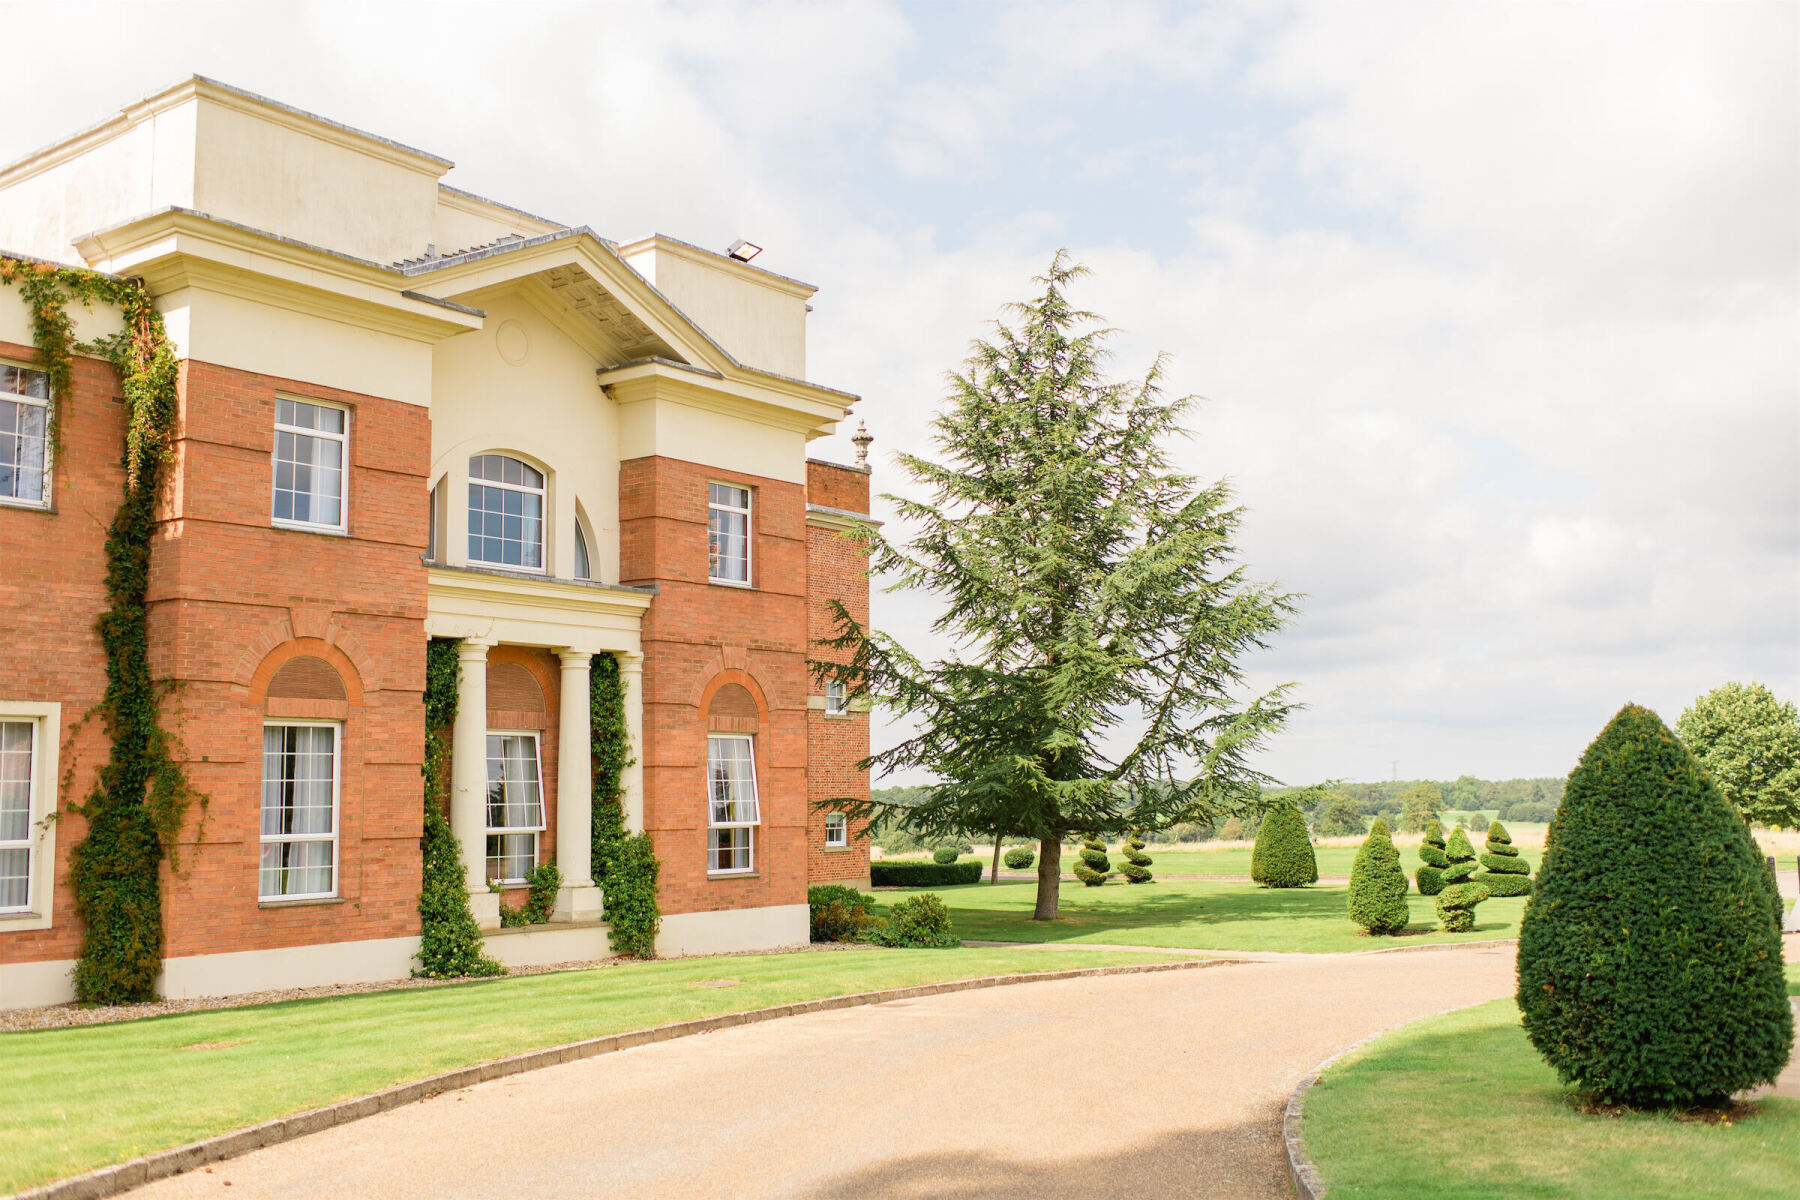 The Four Seasons Hampshire was the setting for a colorful countryside wedding weekend.